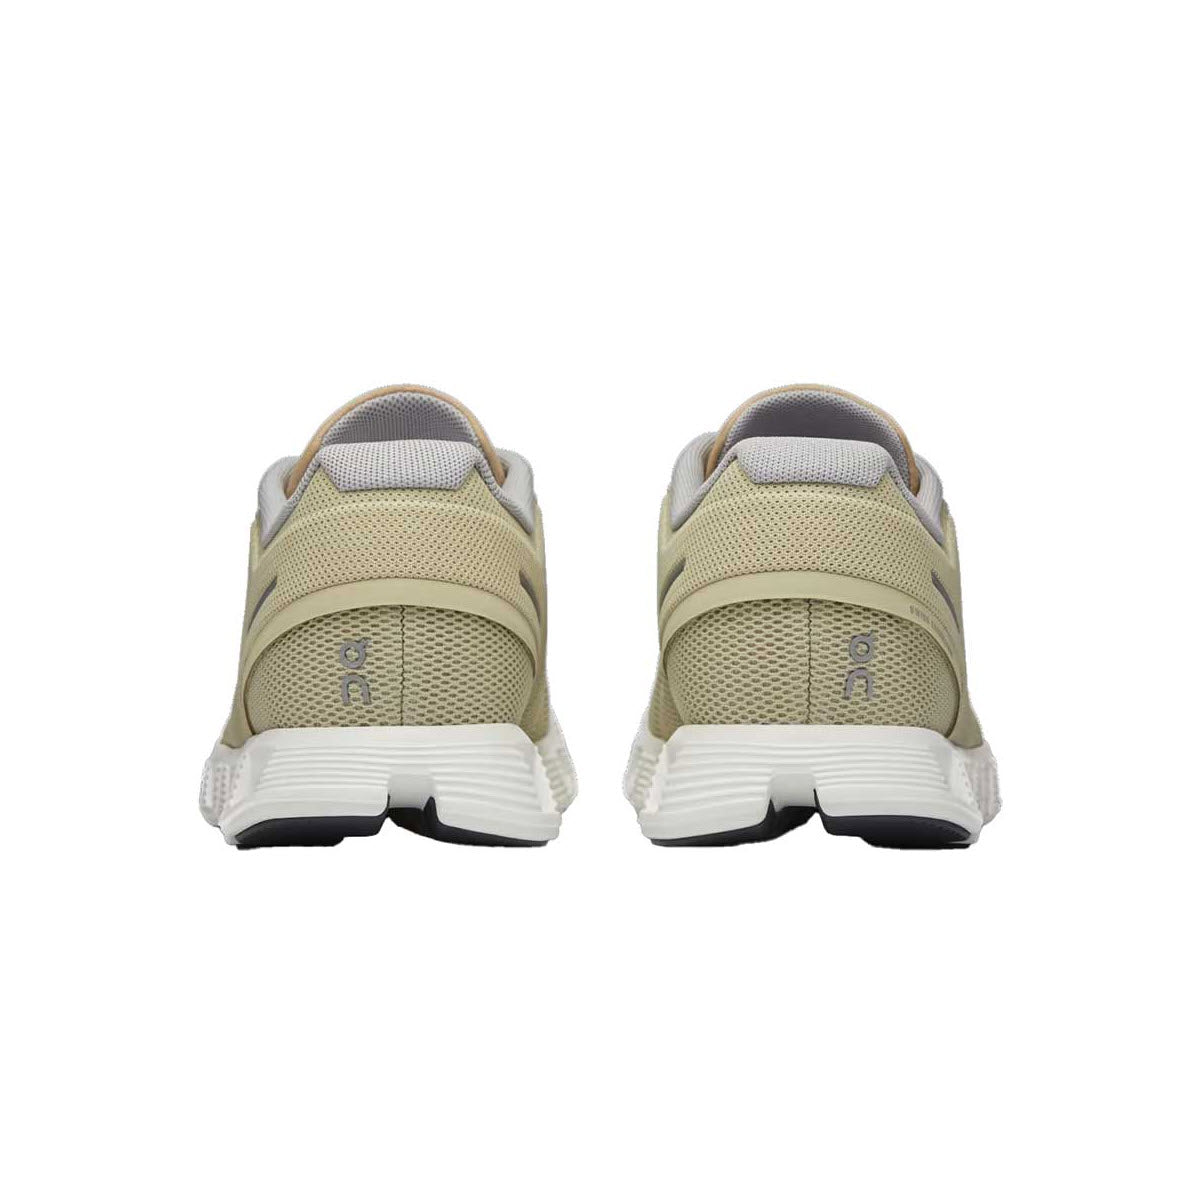 Rear view of a pair of On Running Cloud 5 Haze/Sand - Womens sneakers with white soles and black accents, now featuring an improved fit, displayed against a white background.